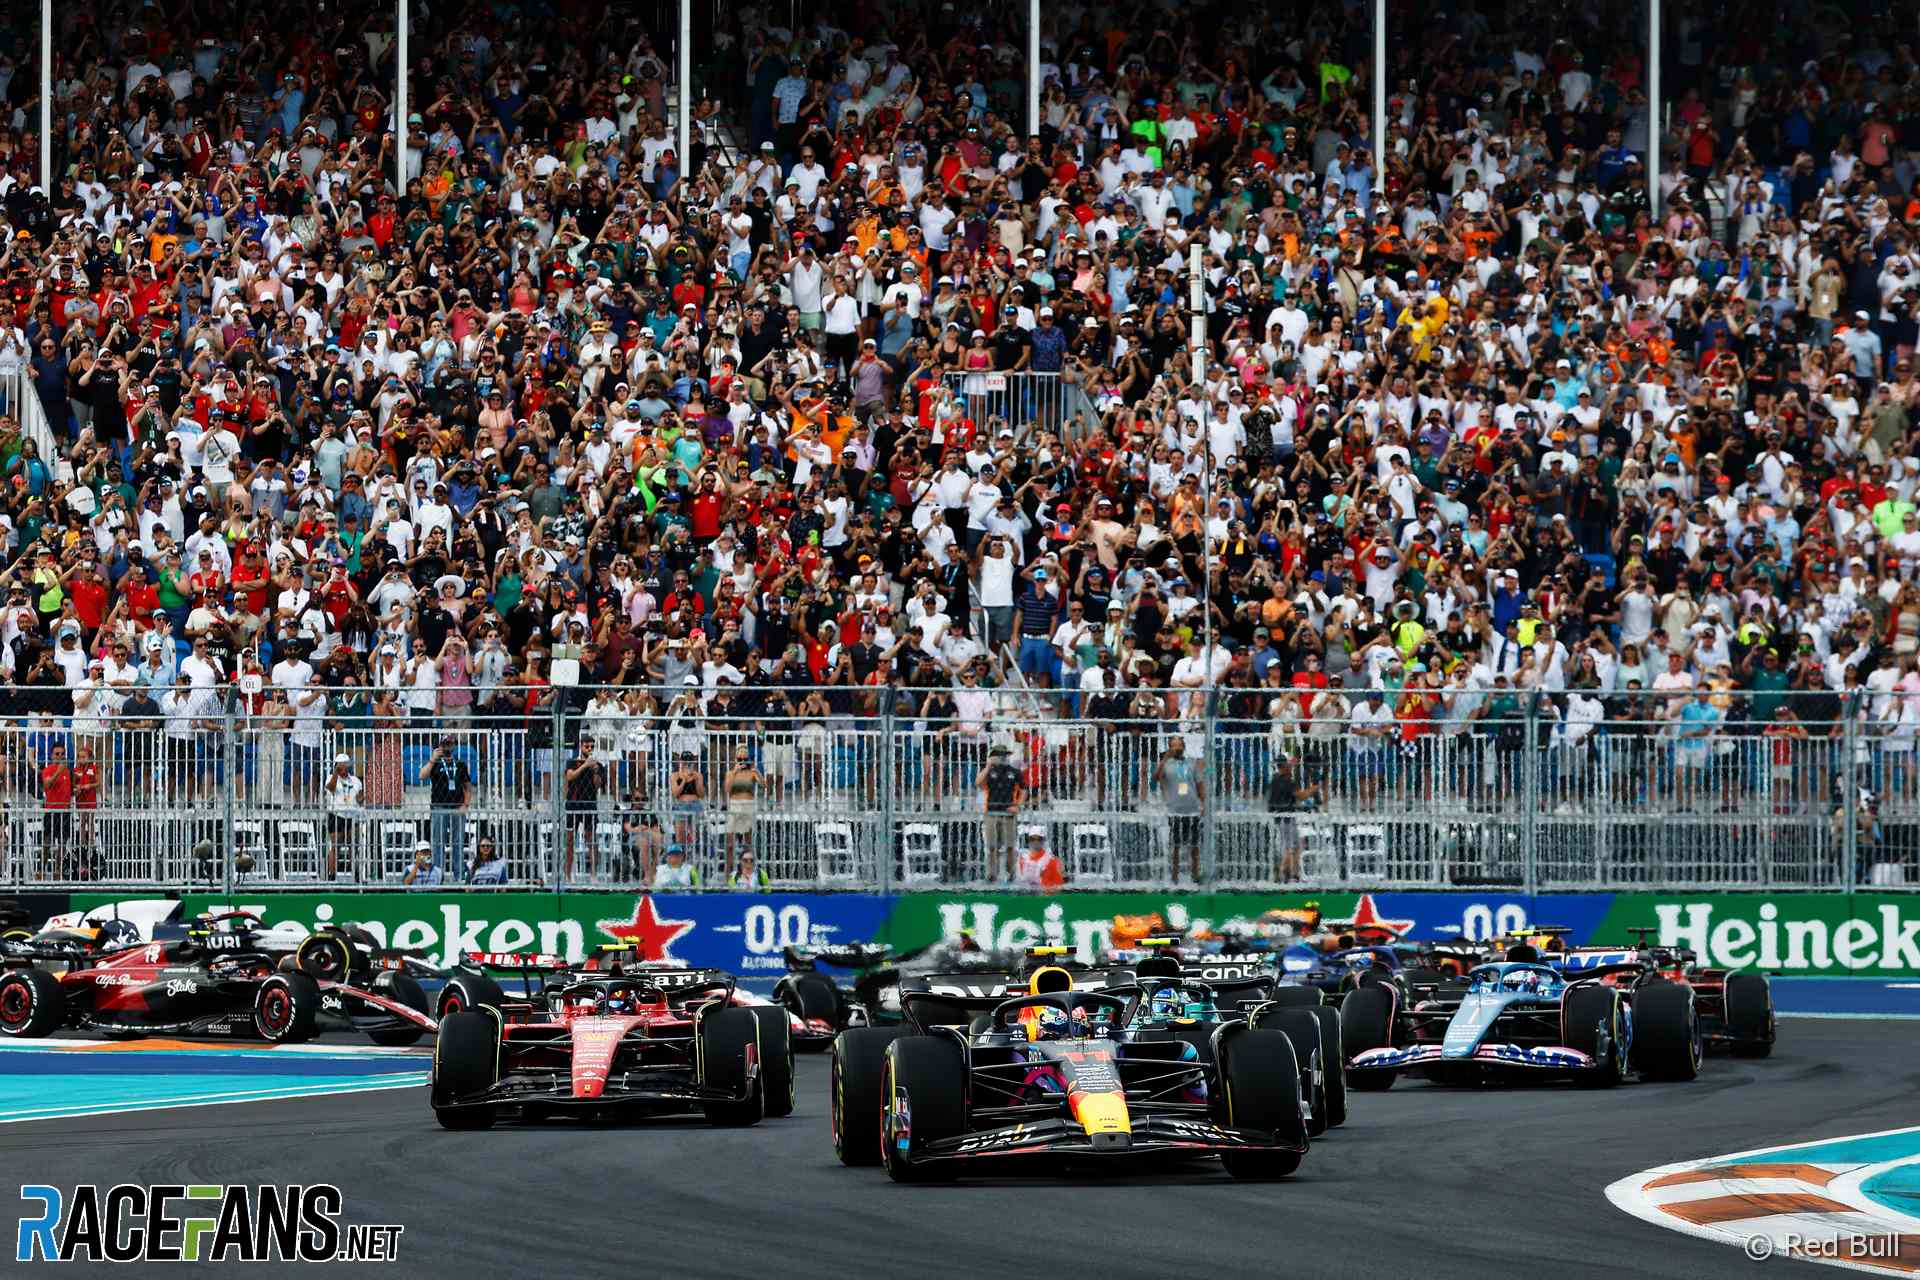 The 2023 Miami Grand Prix was held at Miami International Autodrome and won by Max Verstappen